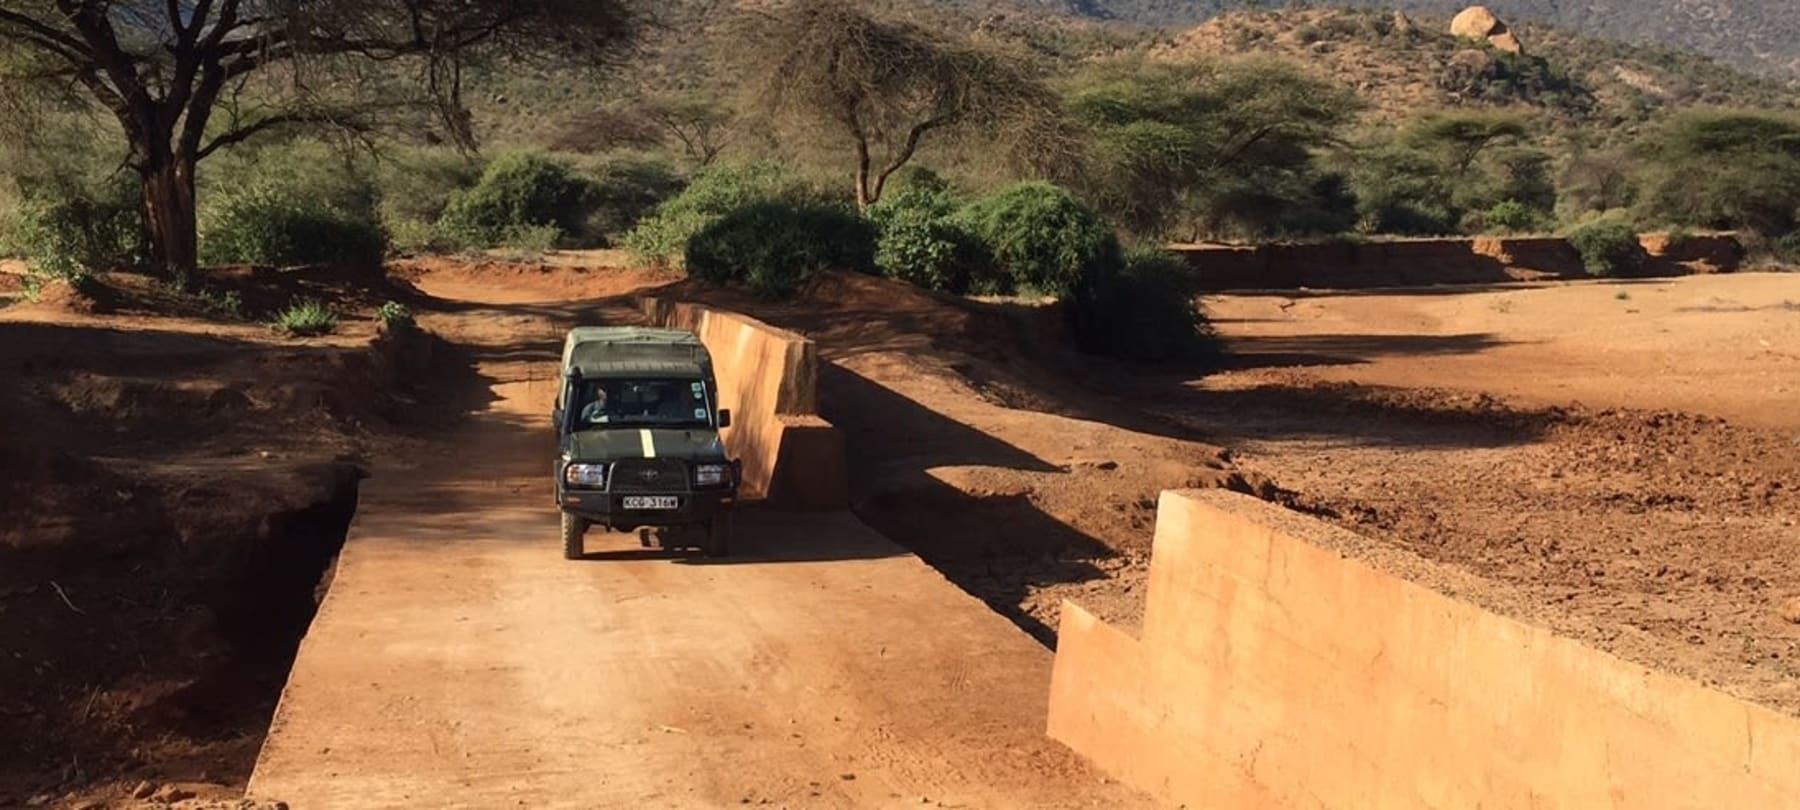 A sand dam road crossing provides water – and bridges a divide between communities